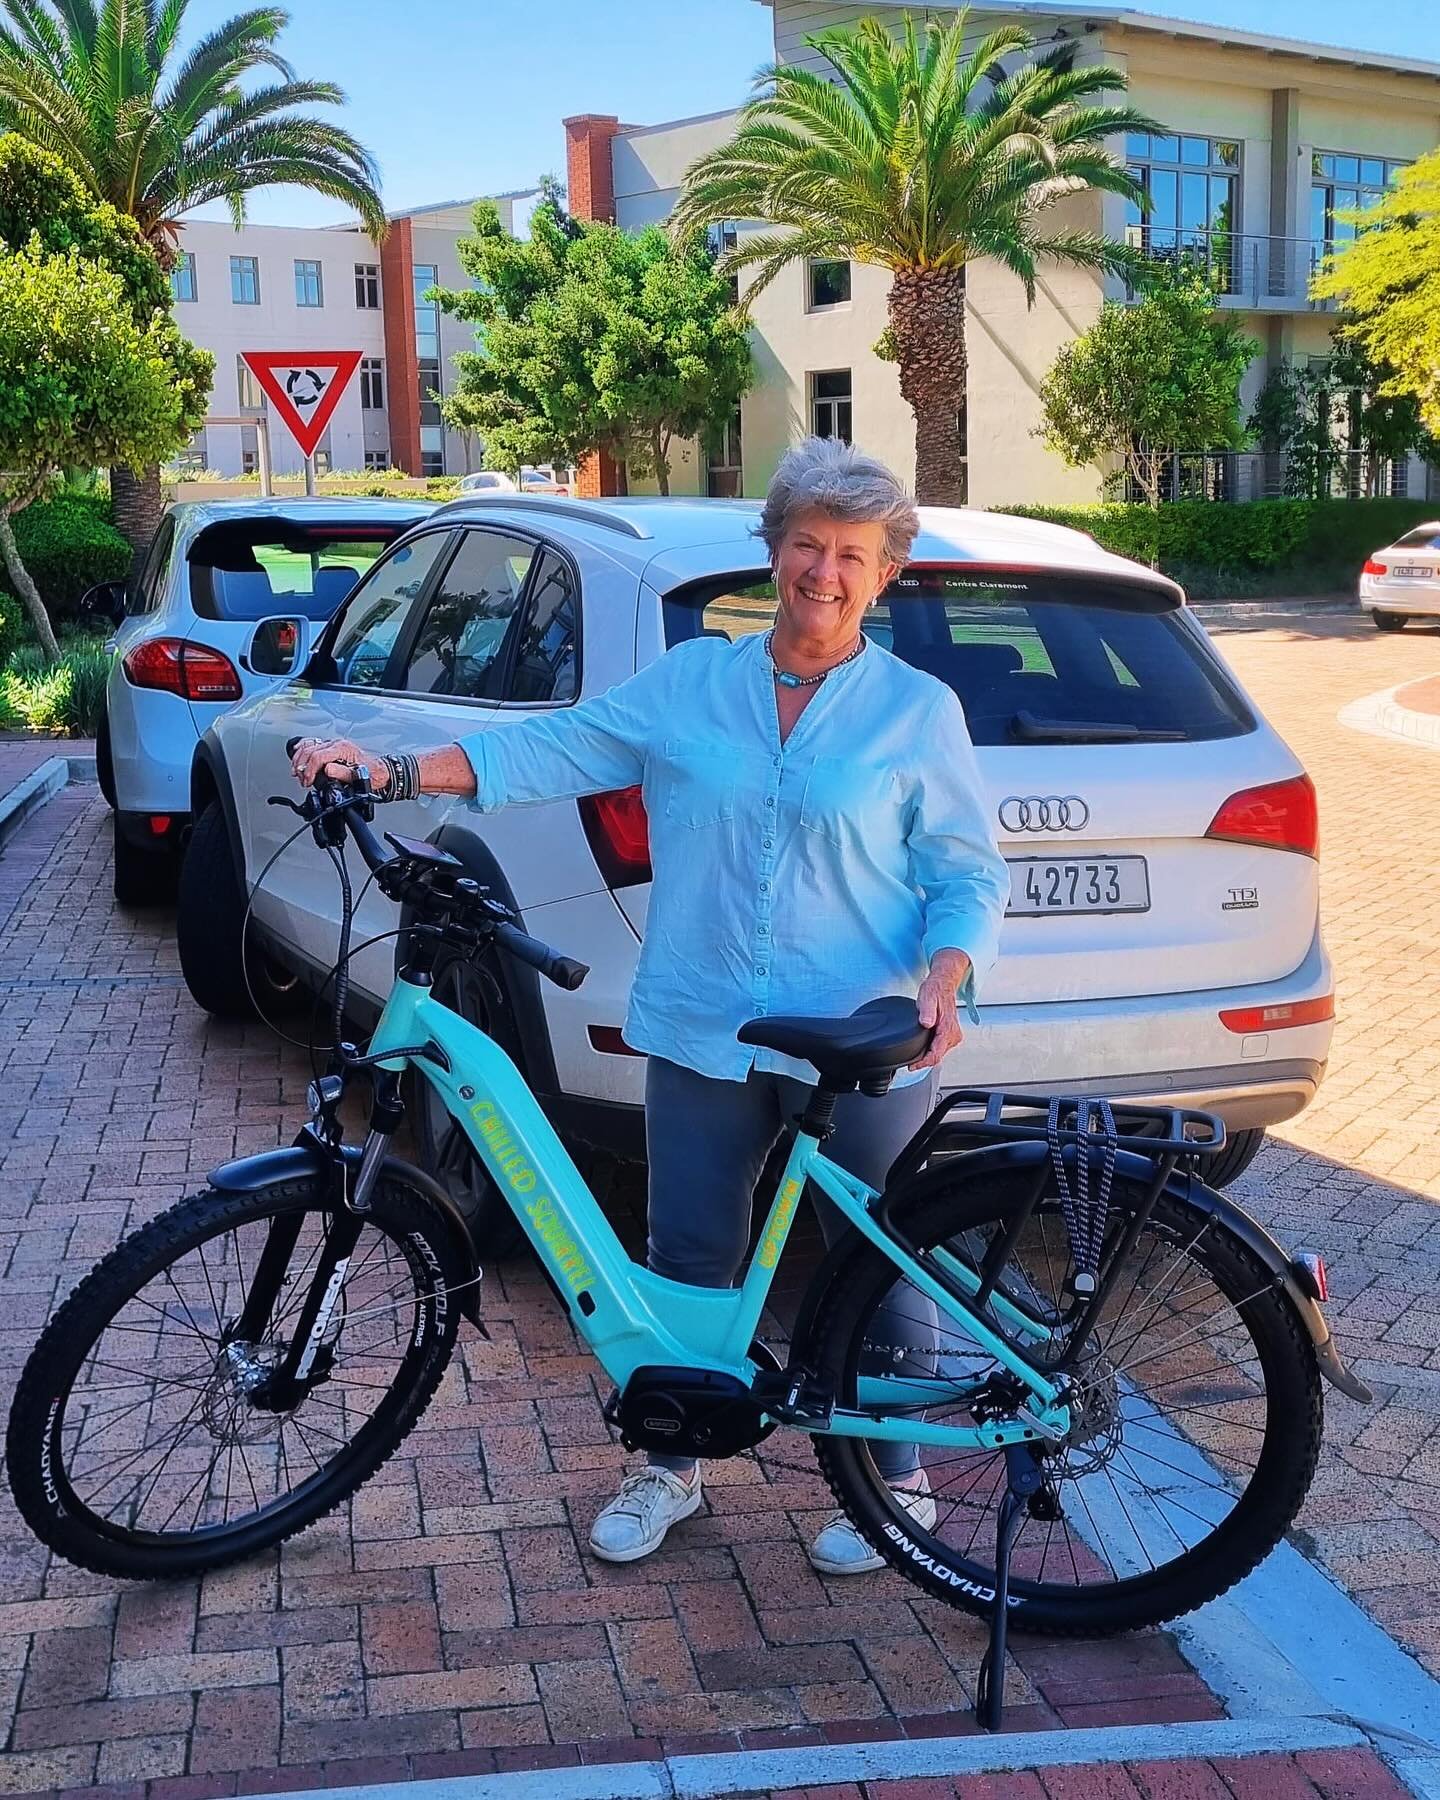 Barbra just picked up her custom built UPTOWN #ebike , a step-thru design #electricbike proudly built in Caoe town. 
Uptown are #ebikes facilitate easy mounting and easy getting off the saddle due to open step-through geometry.
No lifting legs . No s